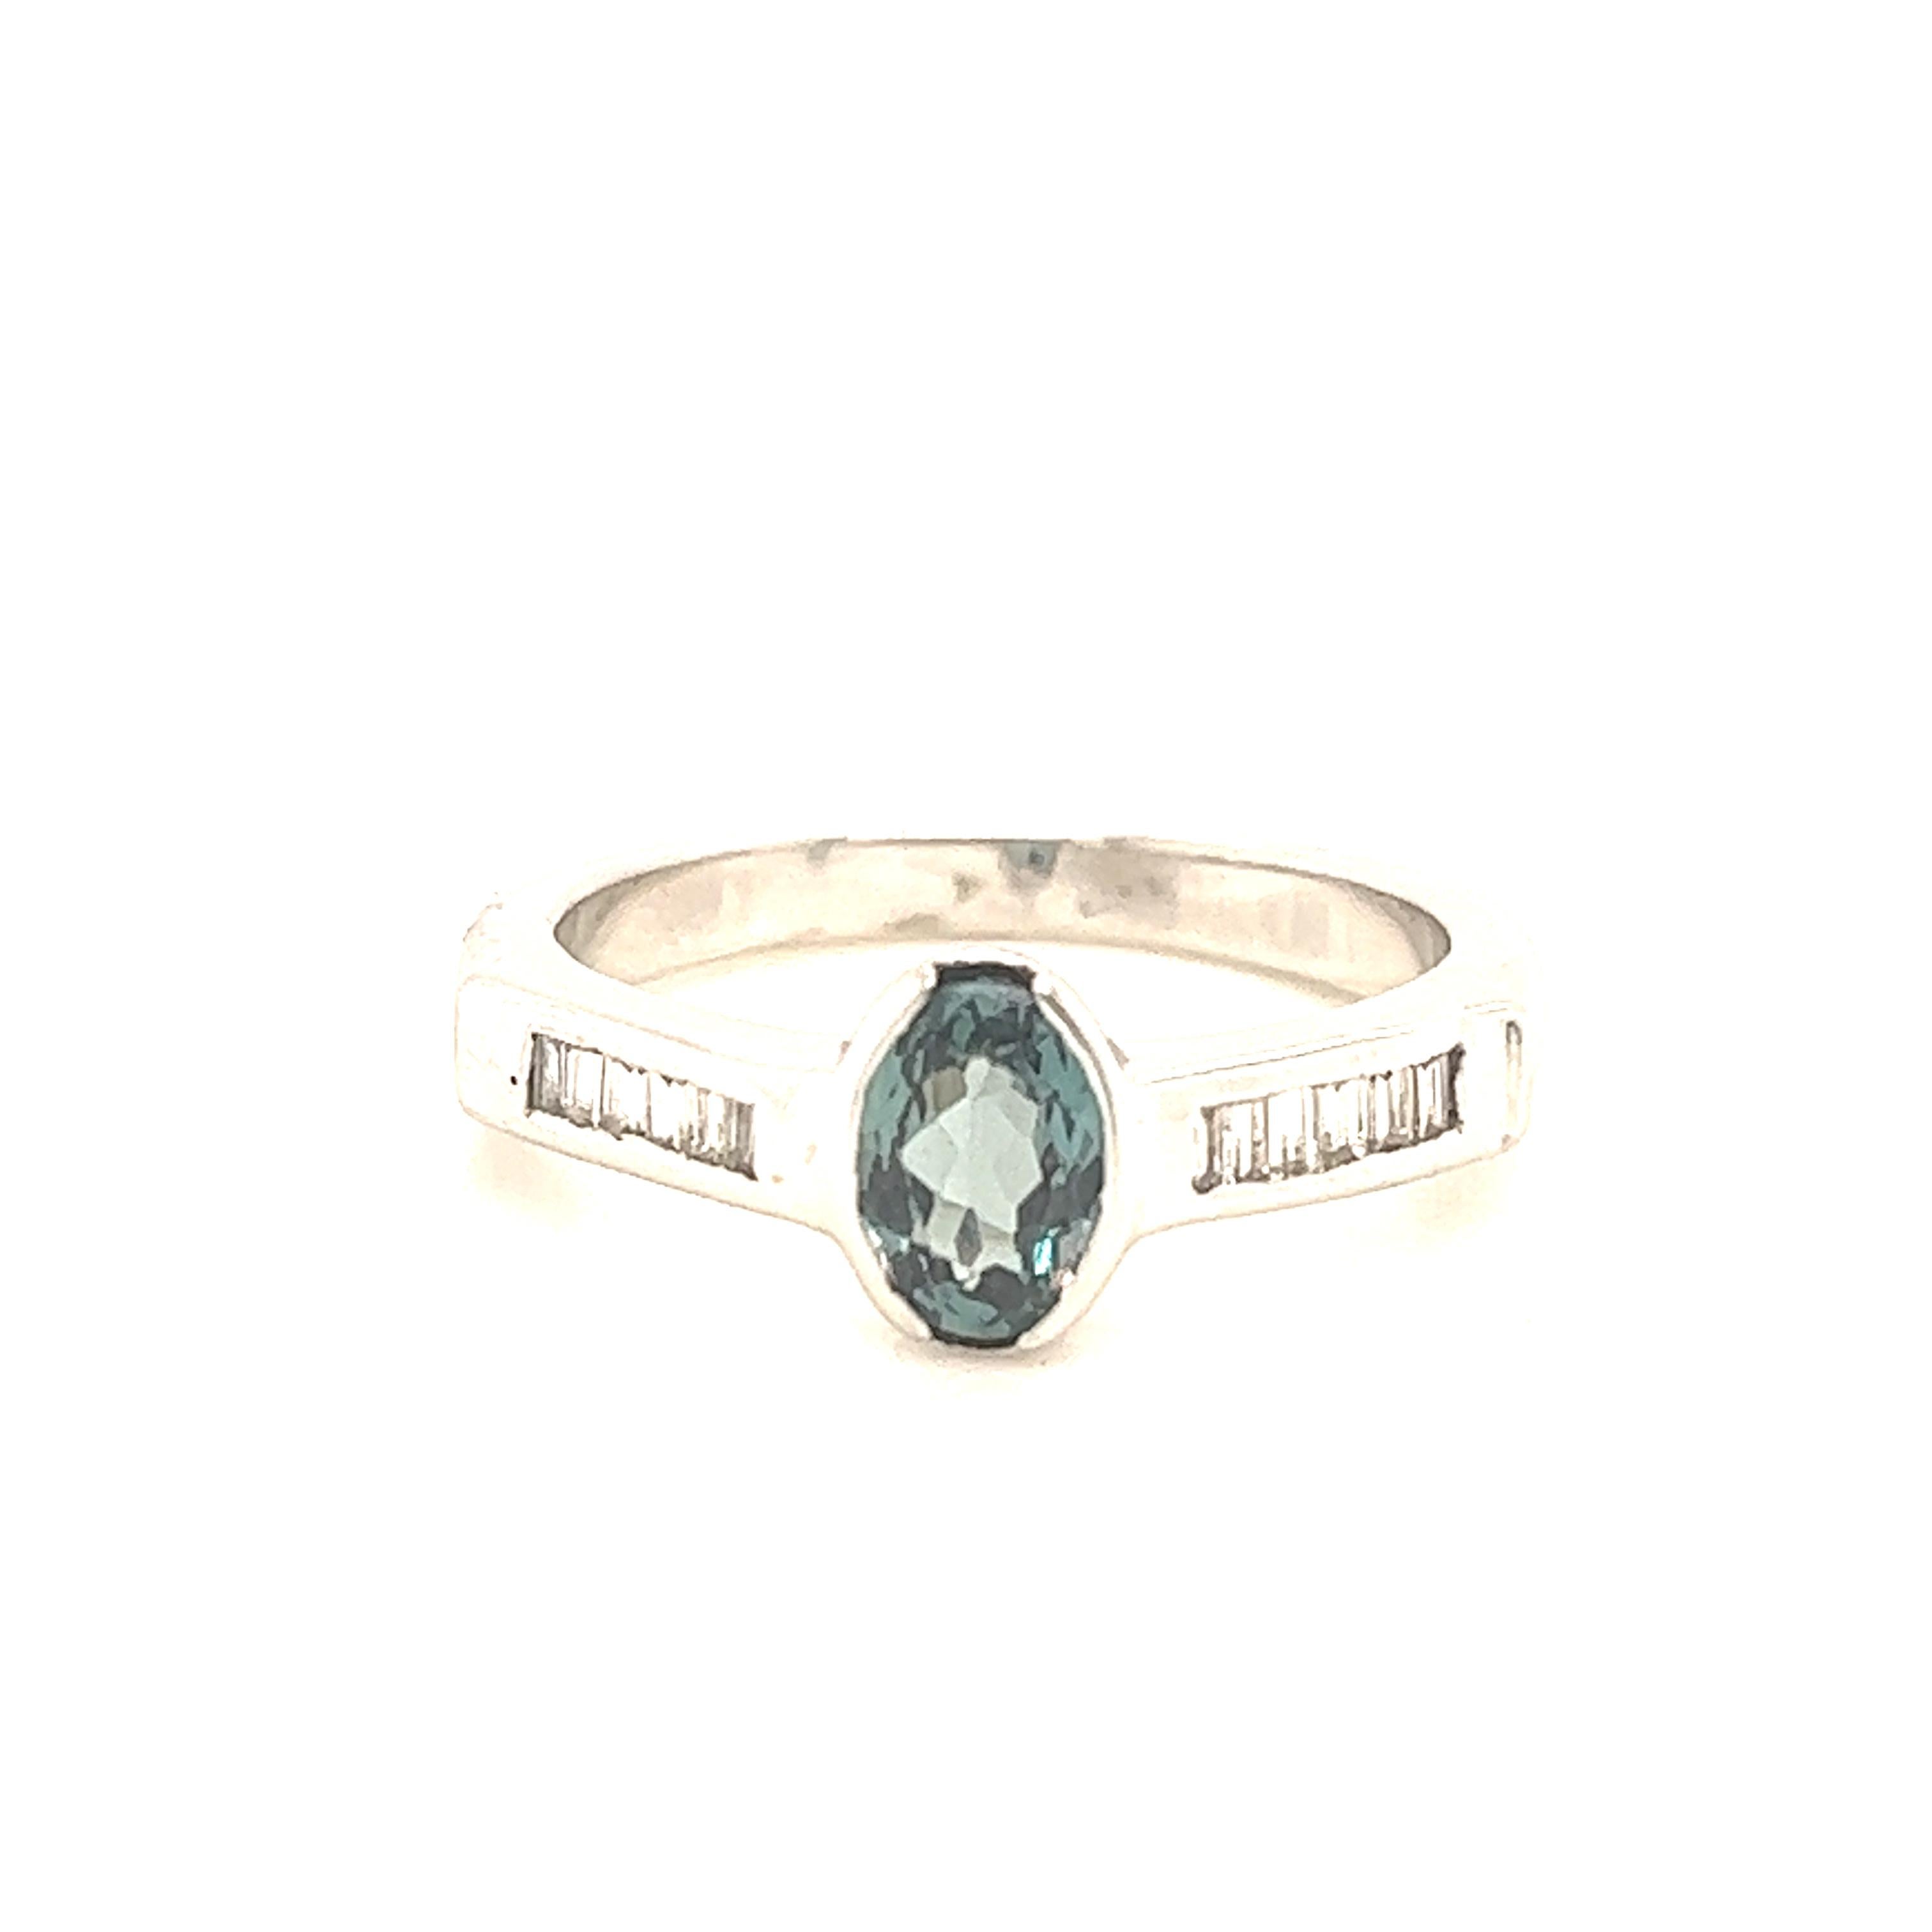 This is a gorgeous natural AAA quality Alexandrite surrounded by dainty diamonds that is set in a vintage white gold setting. This ring features a natural 0.92 carat oval alexandrite that is certified by the Gemological Institute of America (GIA)